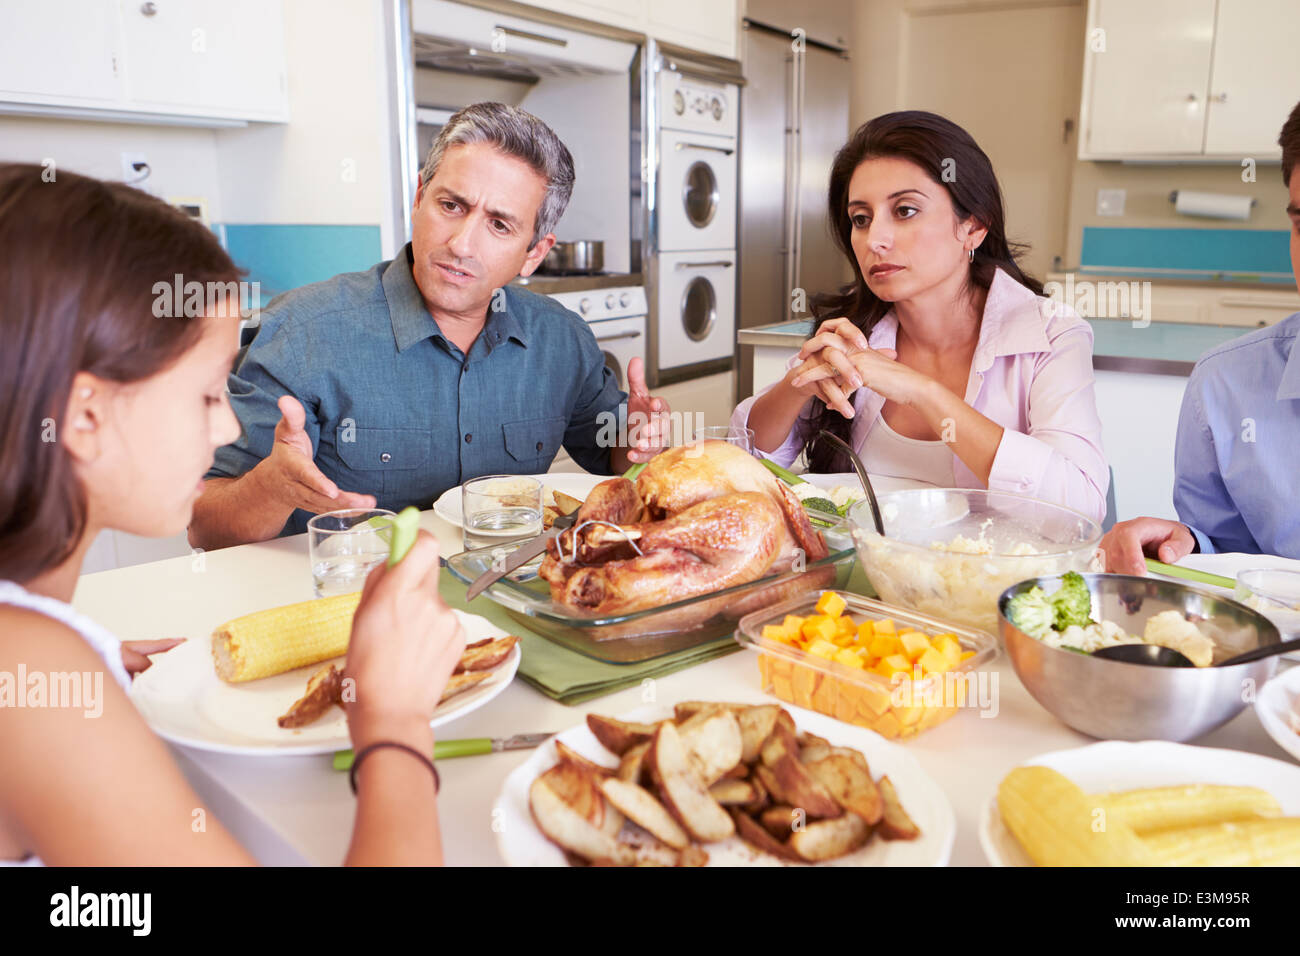 Family Having Argument Sitting Around Table Eating Meal Stock Photo